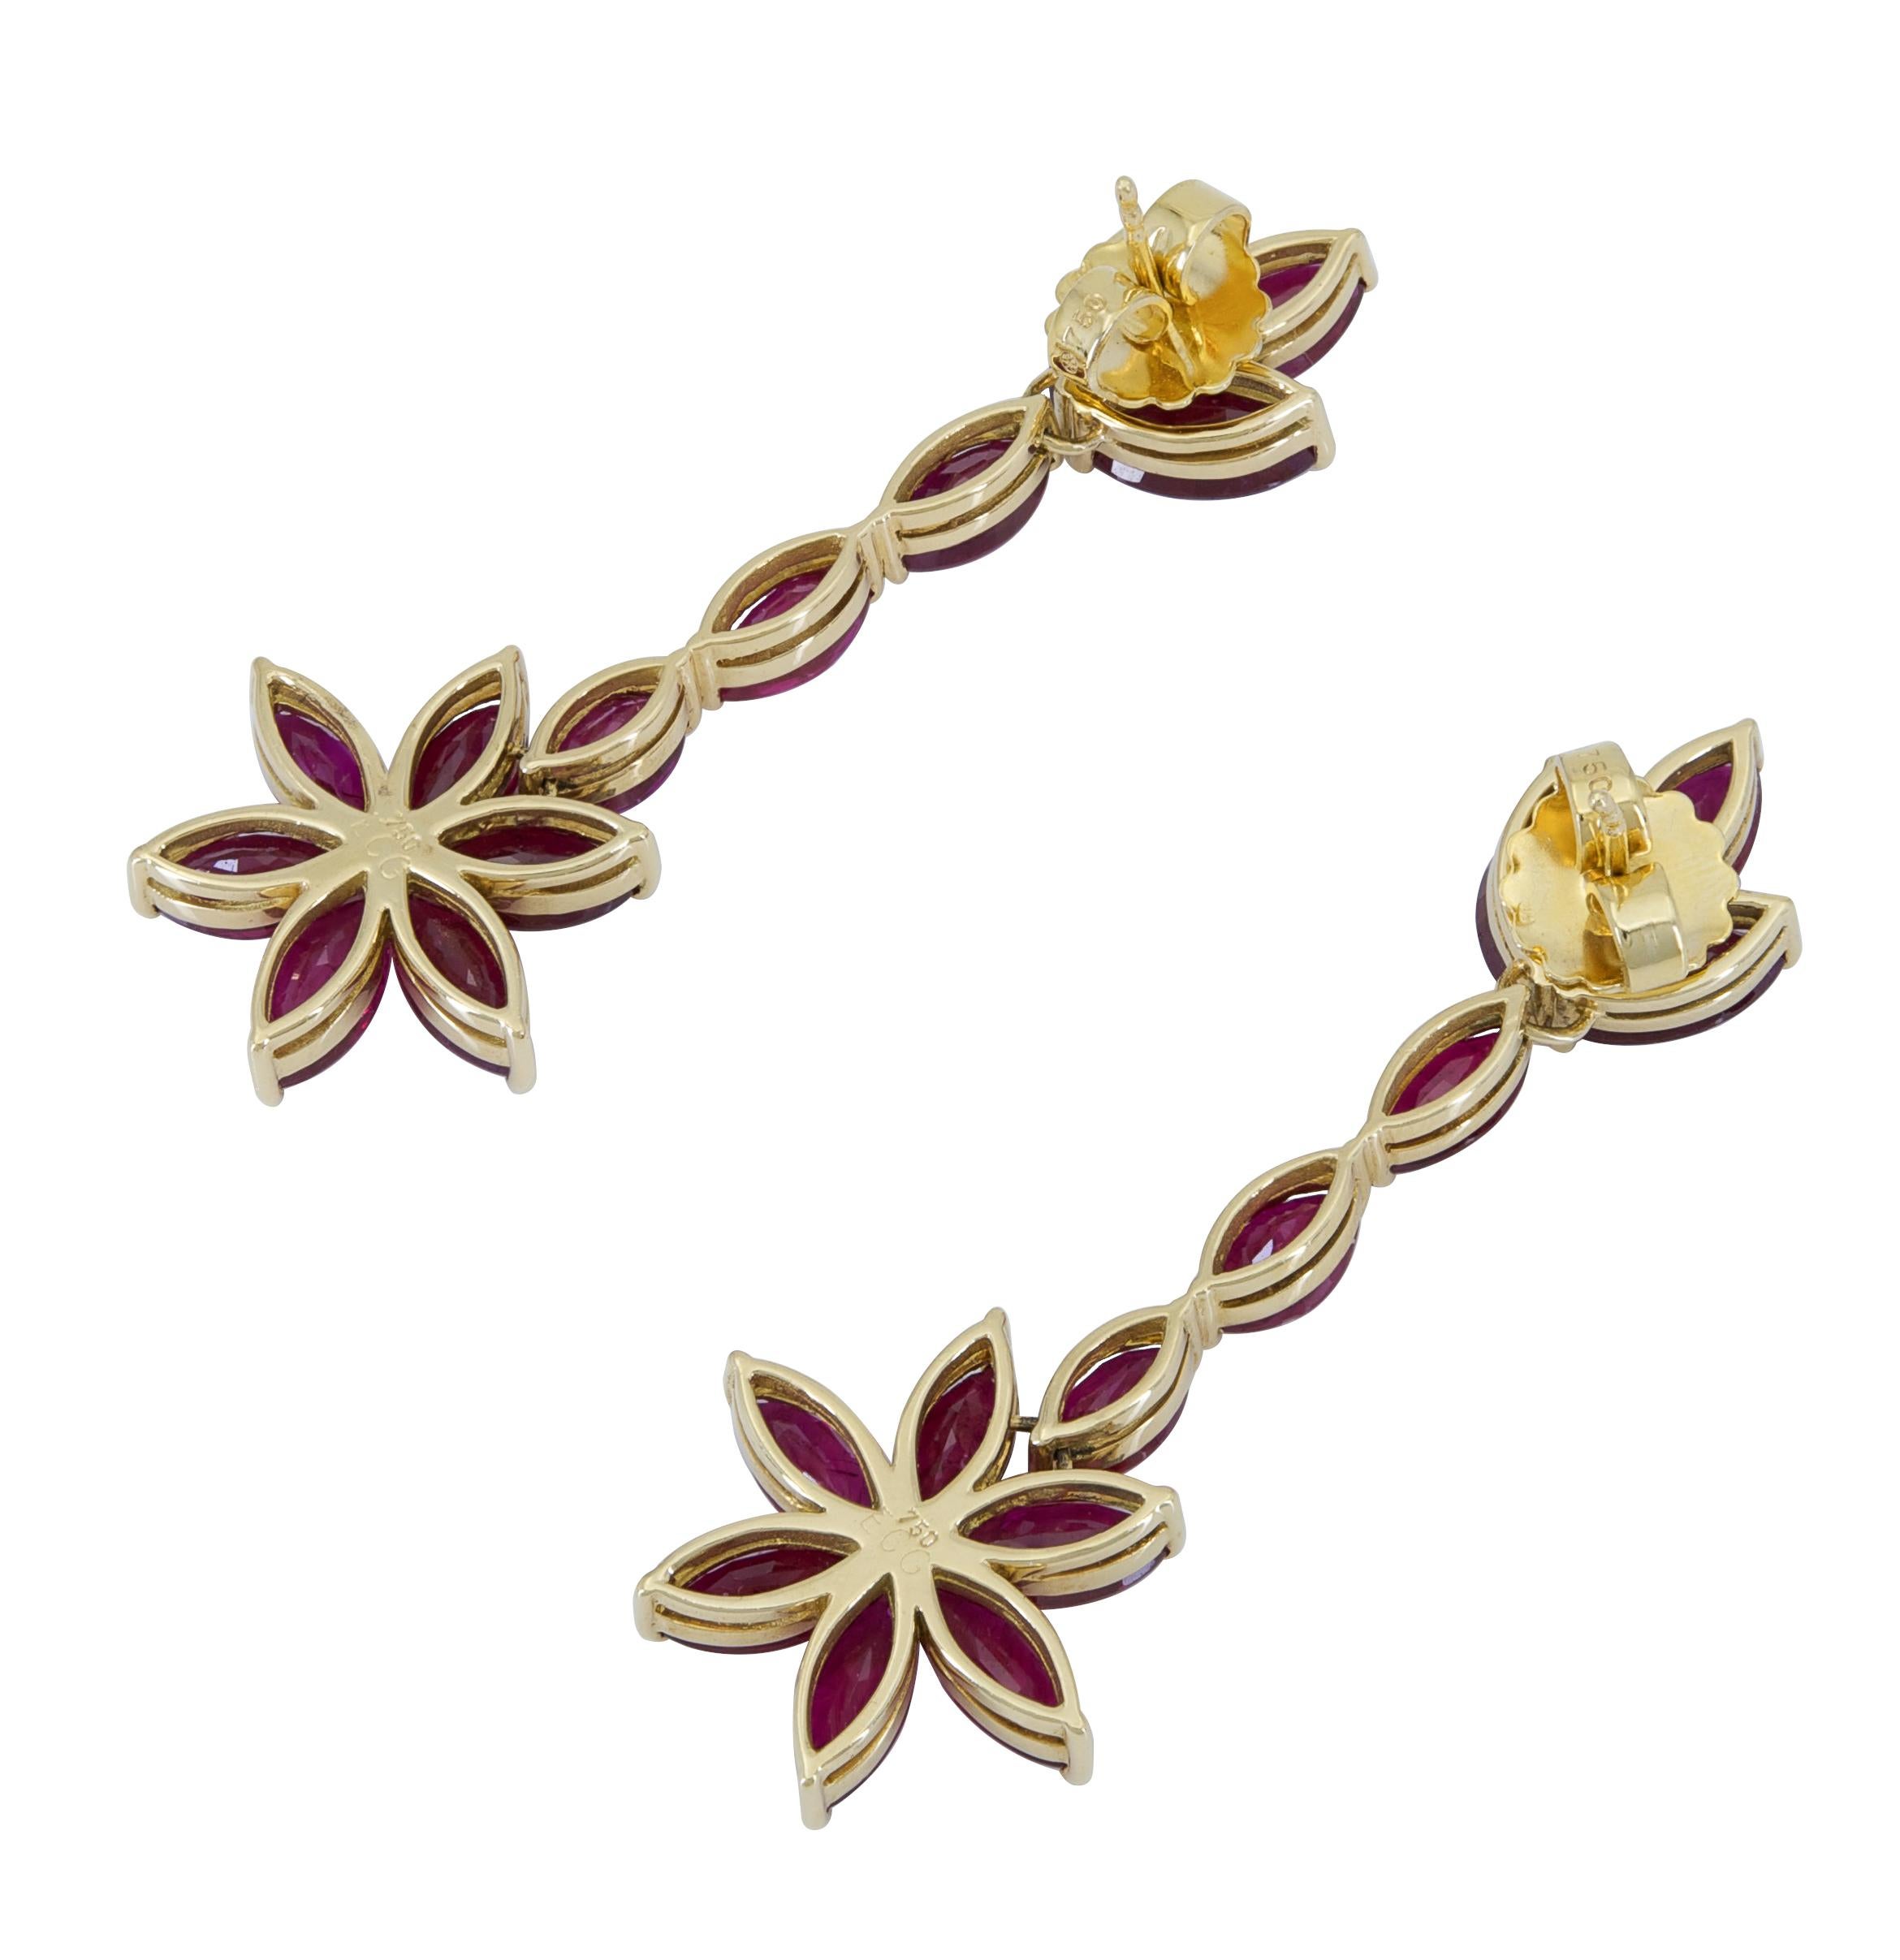 A fashionable pair of dangle earrings showcasing marquise cut rubies arranged in a chic flower design. Suspended on a row of marquise rubies set in 18k yellow gold. 
Rubies weigh 27.51 carats total.
Dimensions: 5.90cm (L) x 2.10cm (W)
Creator: Ely